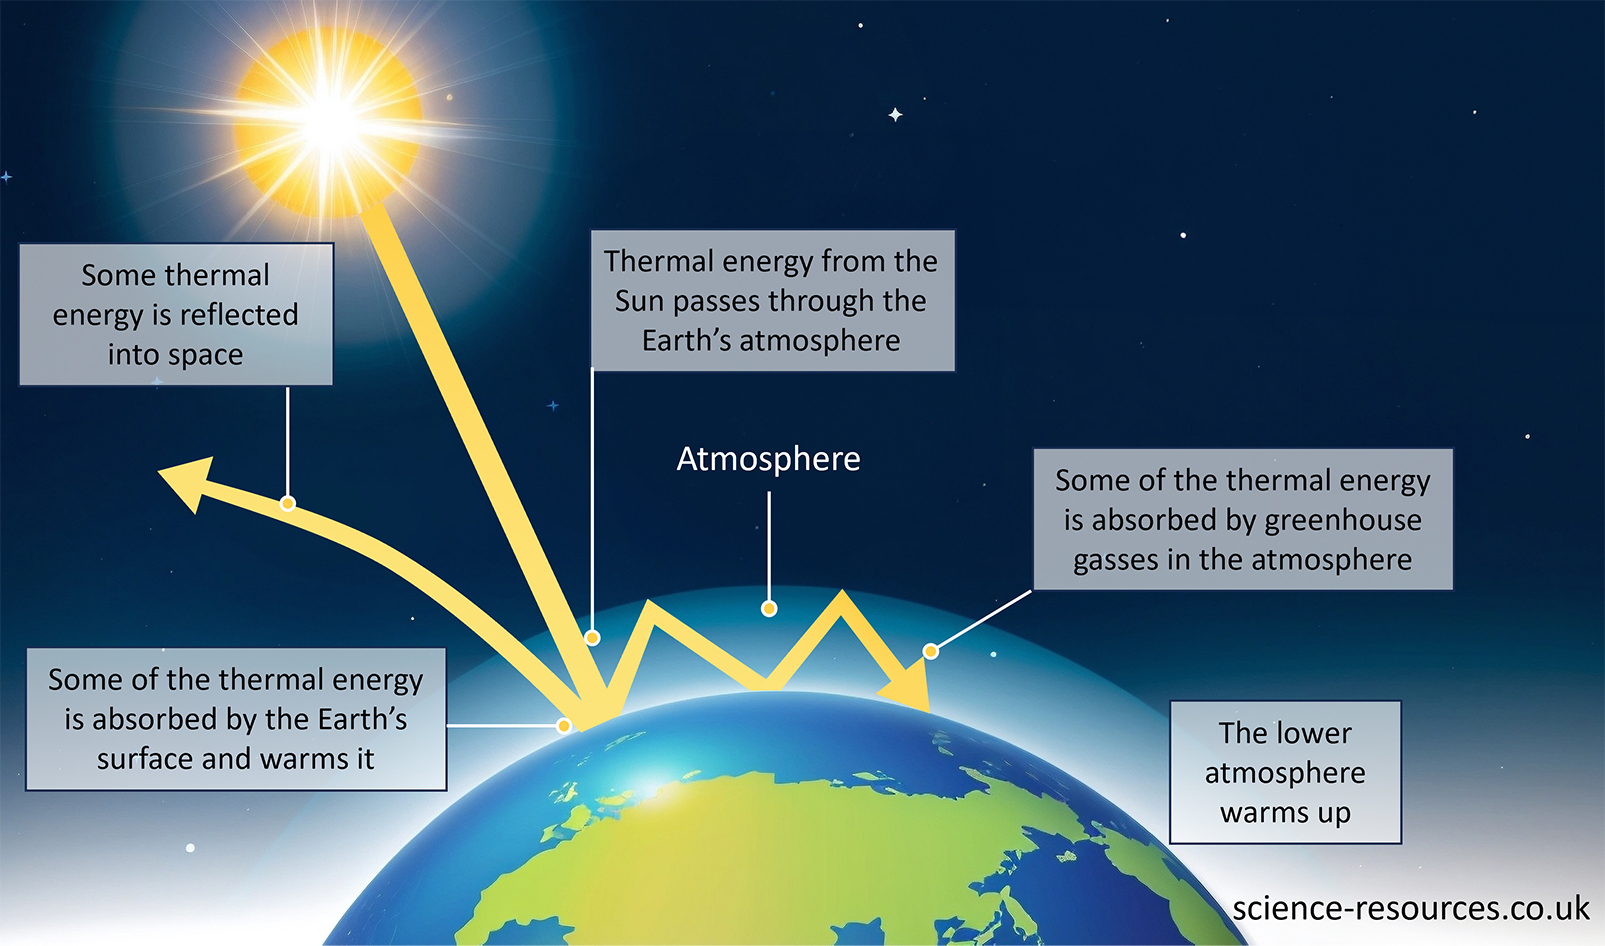 This image is a diagram illustrating how thermal energy from the Sun interacts with the Earth and its atmosphere. It shows the process of solar energy passing through the atmosphere, being absorbed by the Earth and greenhouse gases, and some of it being reflected back into space.